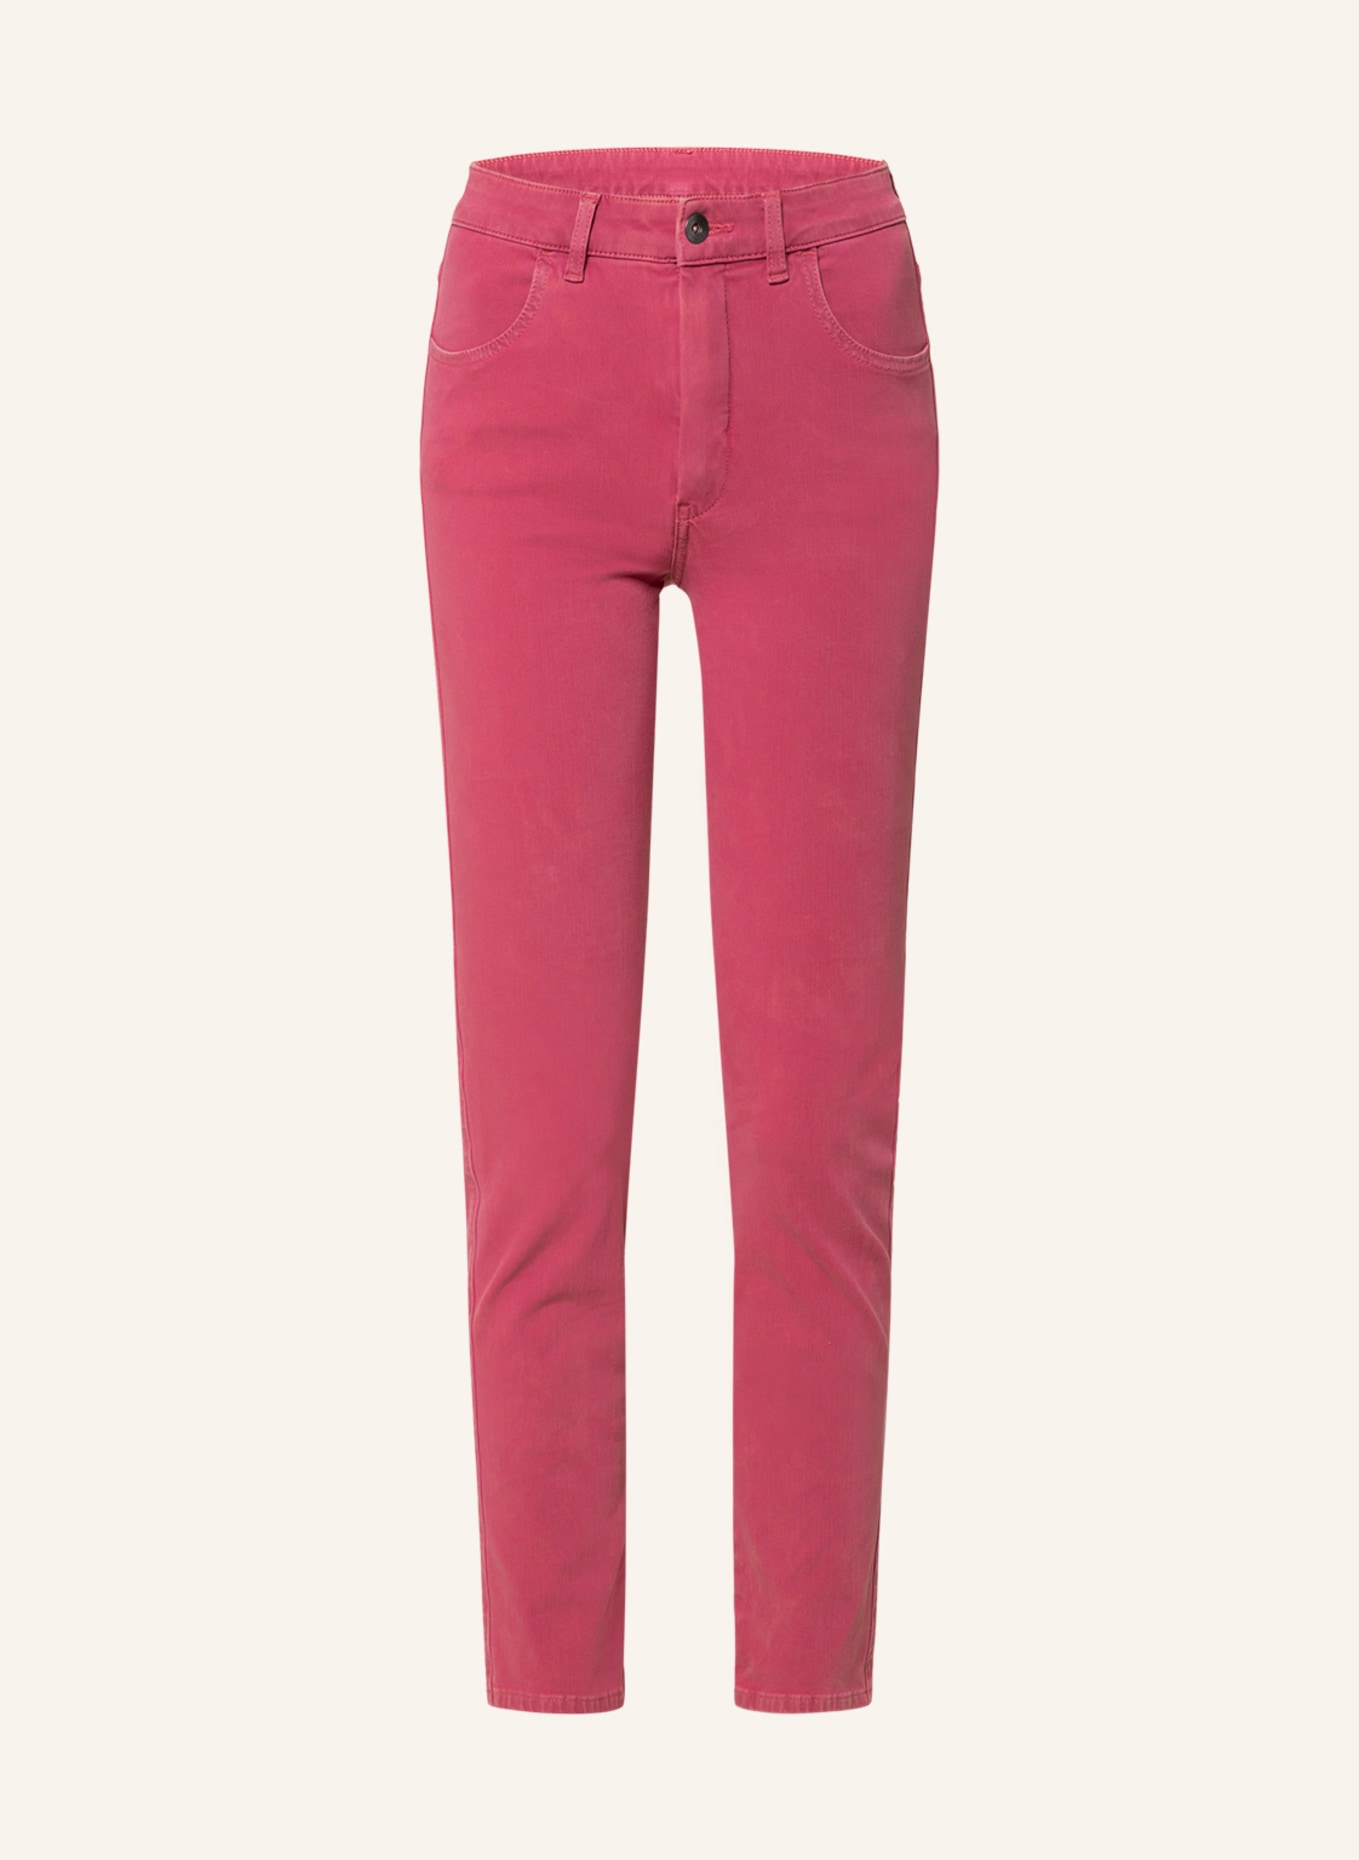 ITEM m6 7/8 skinny Jeans POWER PANTS with shaping effect, Color: 760 moody berry (Image 1)